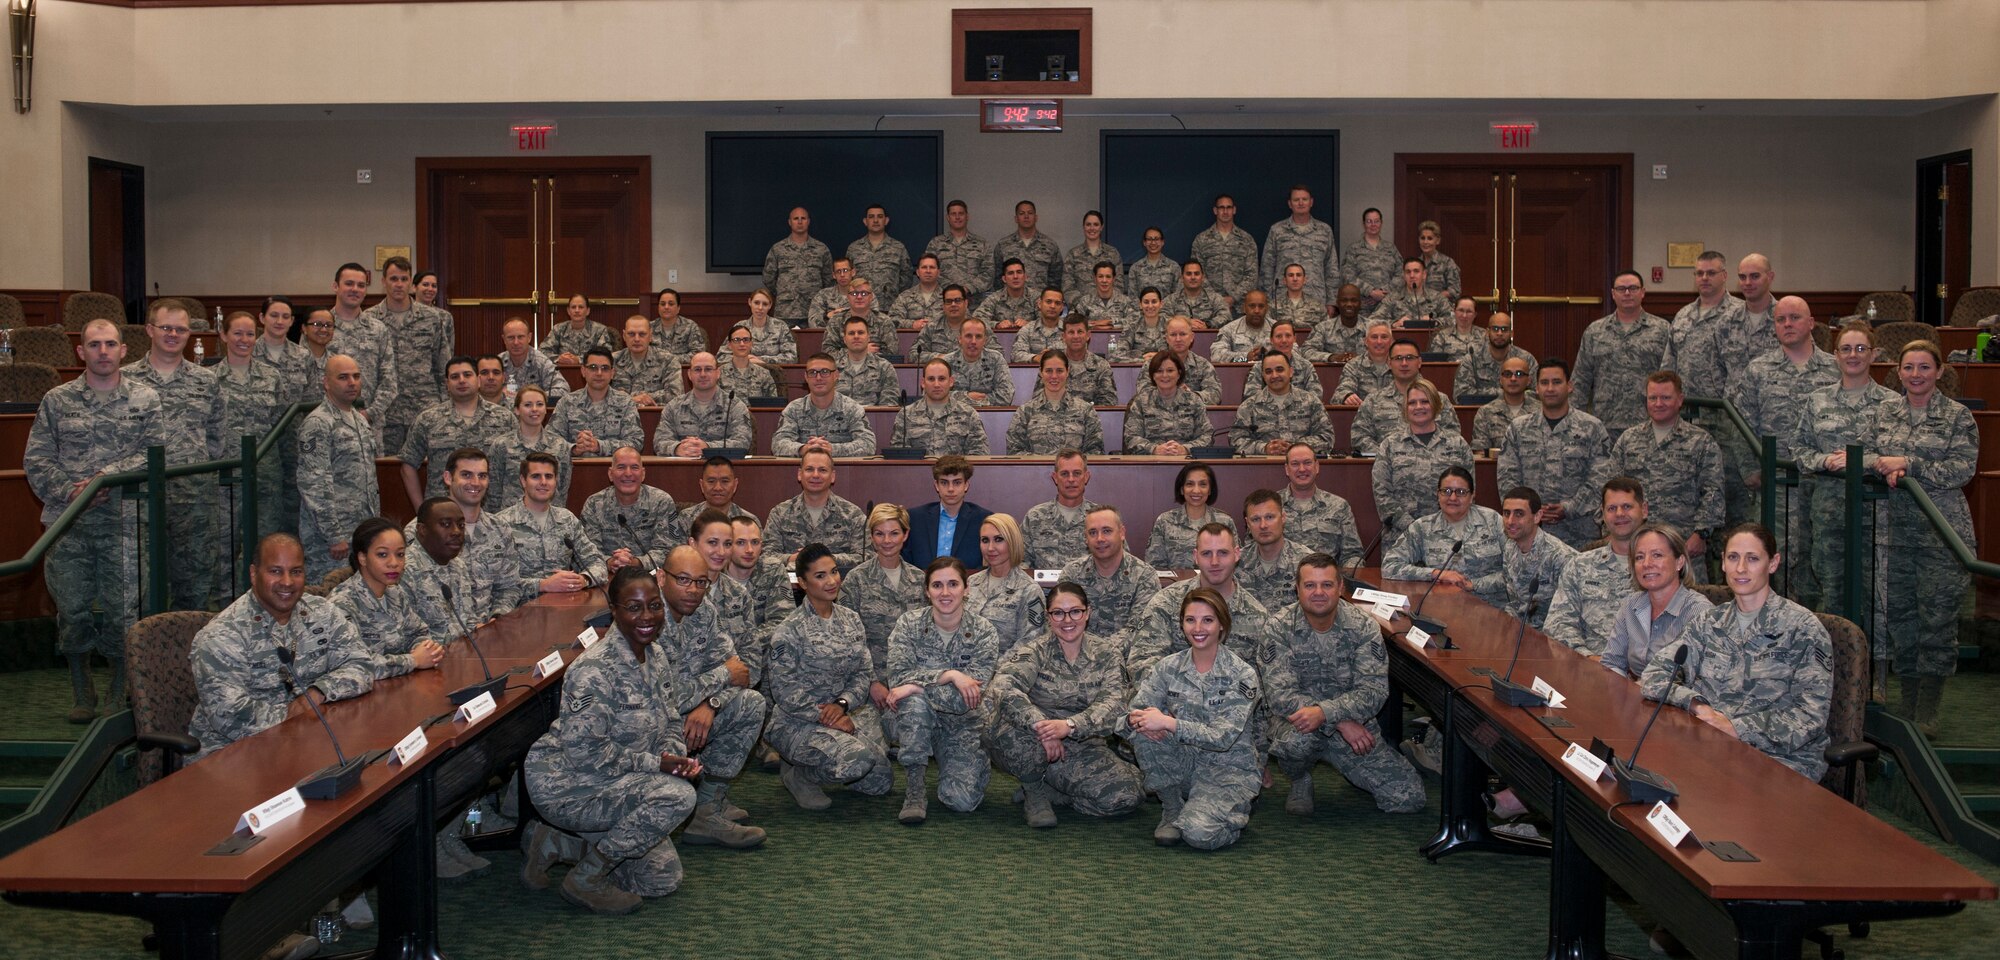 U.S. Air Force Individual Mobilization Augmentee (IMA) Airmen pause for a group photo during an Air Force IMA assembly hosted by U.S. Central Command at MacDill Air Force Base, Fla., April 27, 2018.